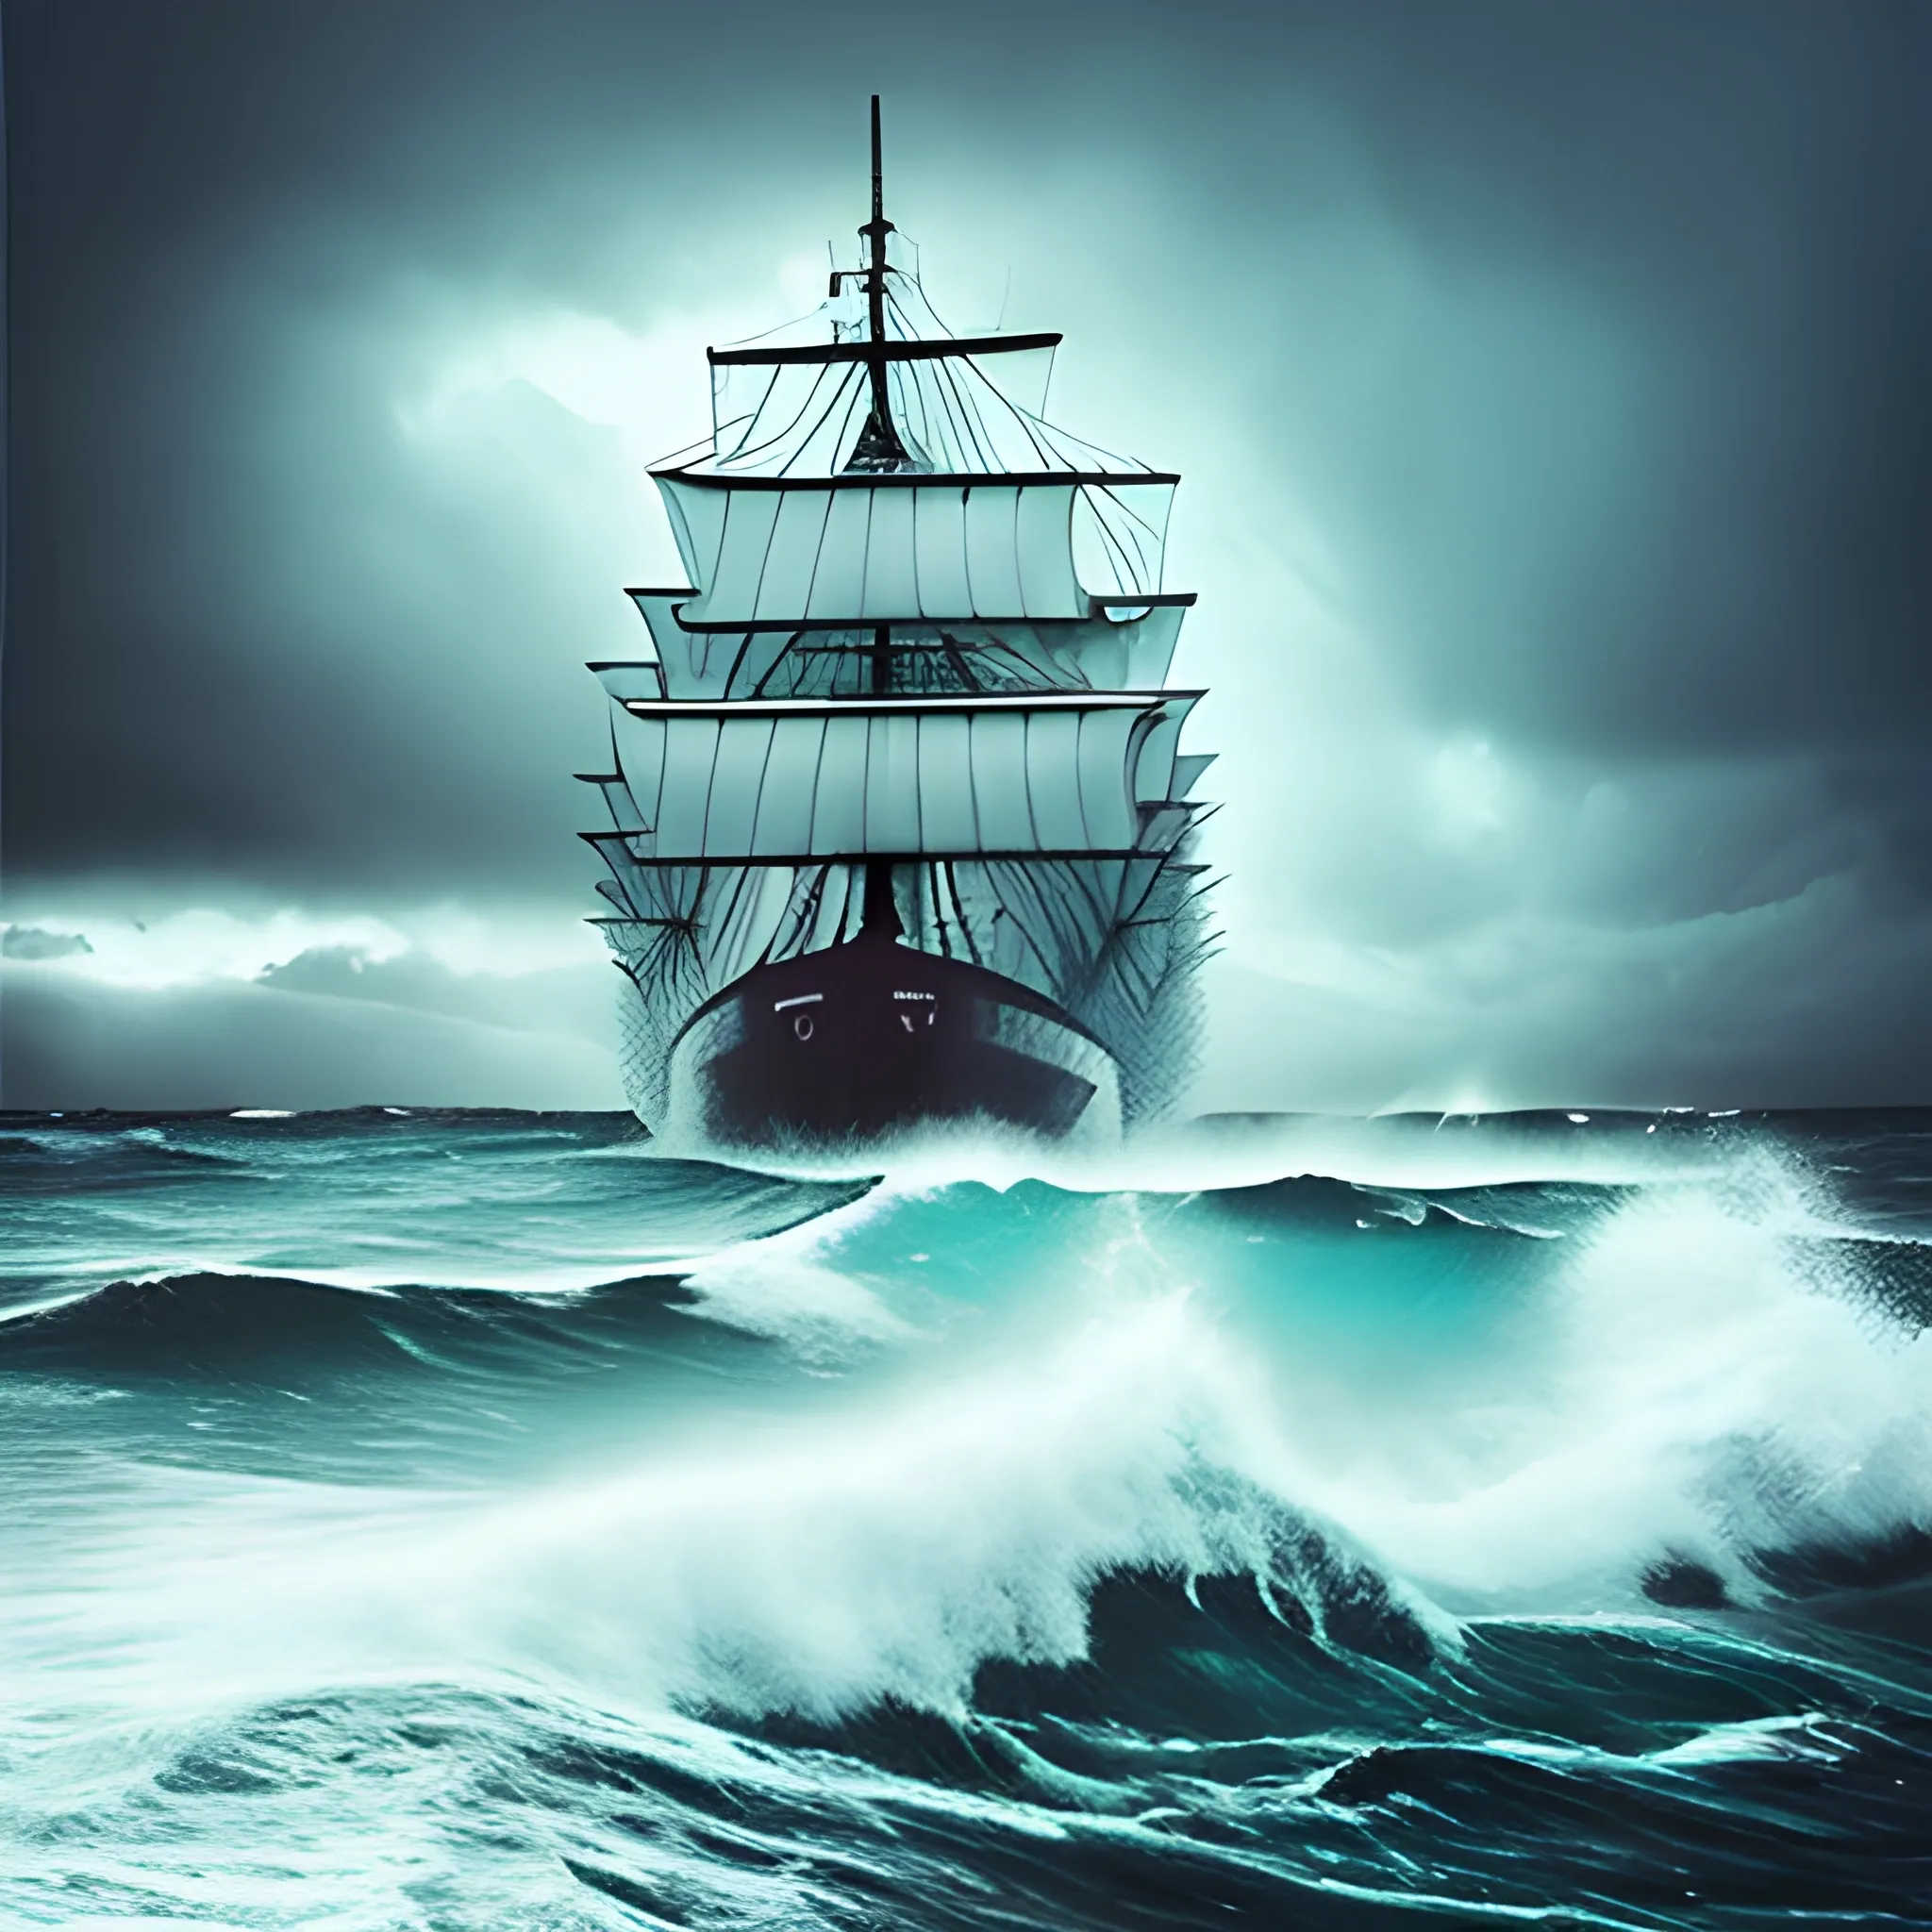 ship in a stormy and rainy sea, Trippy